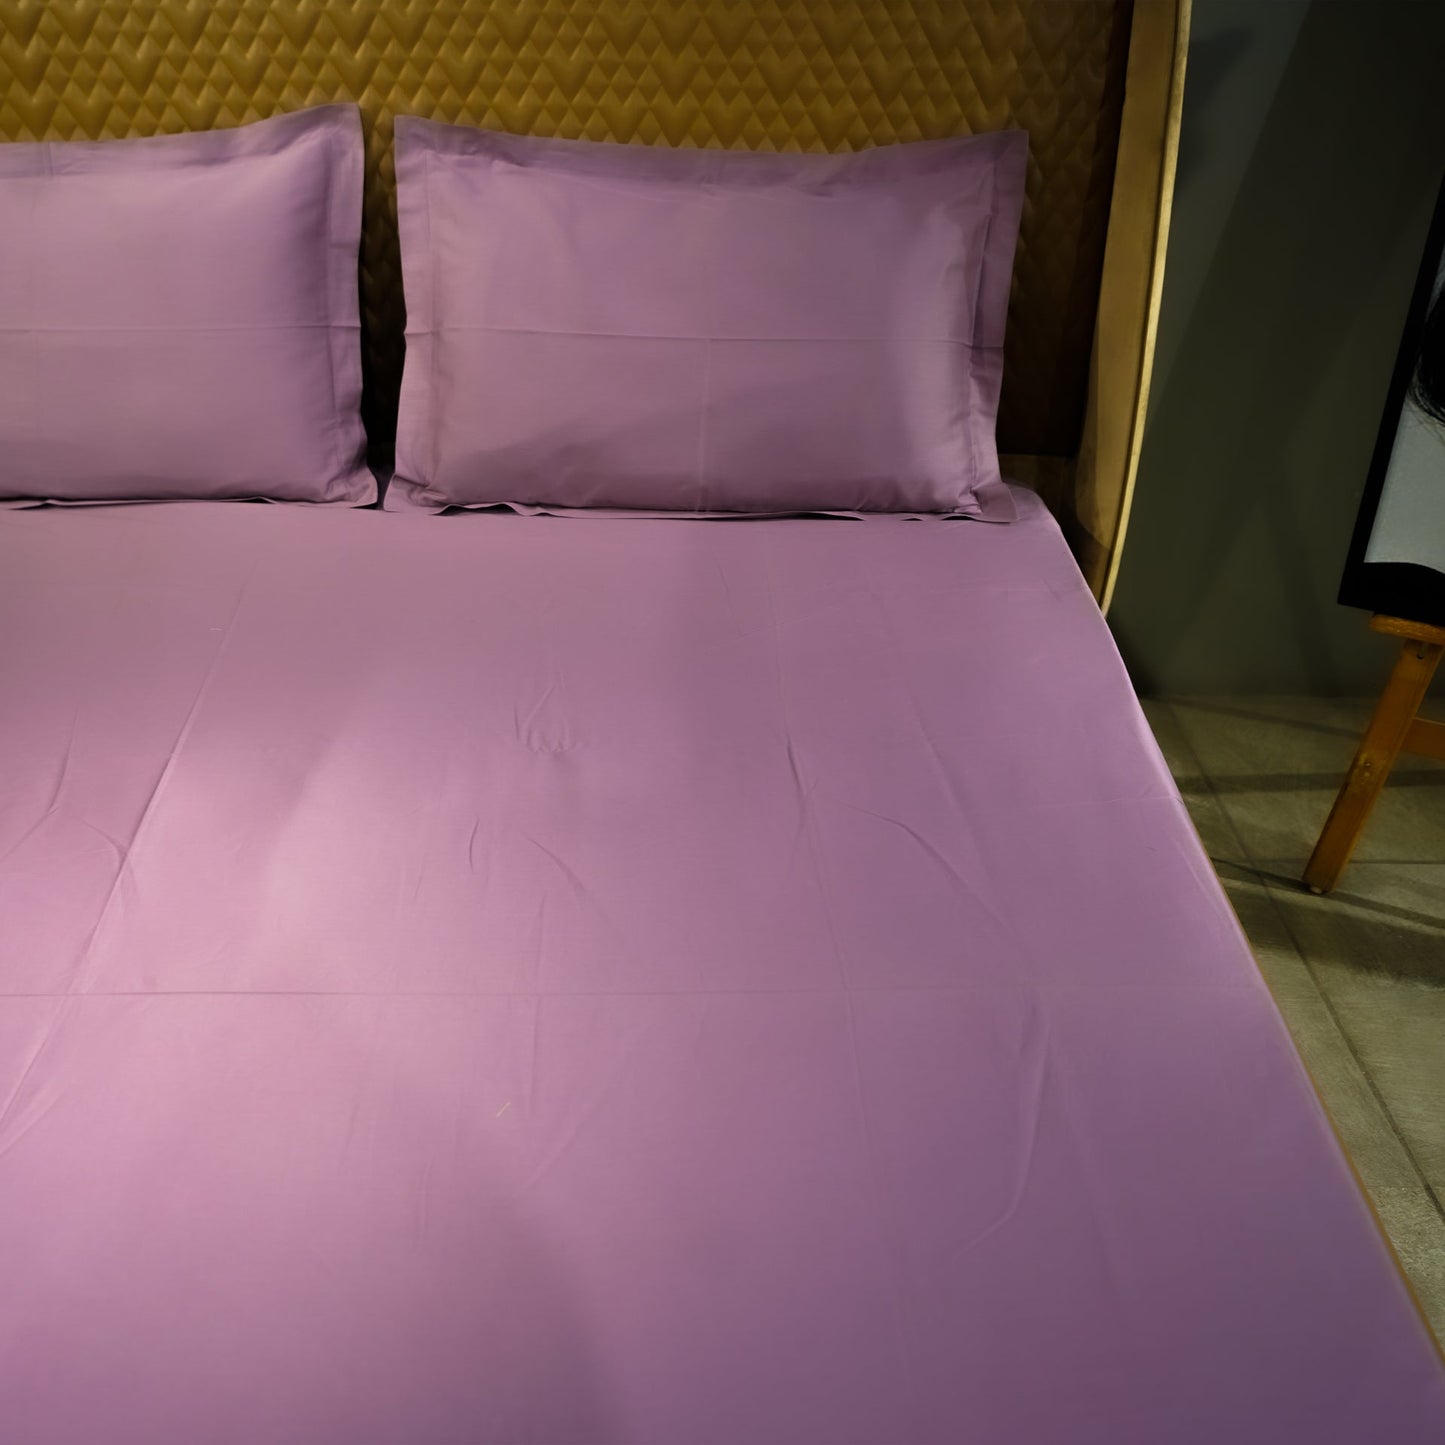 Lavender Luxury Bedsheet with 2 Pillow Covers at Kamakhyaa by Aetherea. This item is 100% Cotton, 300 TC, 500 TC, Bedsheets, Home, King, Lavender, Plain, Plain Bedsheets, Purple, Queen, Solid